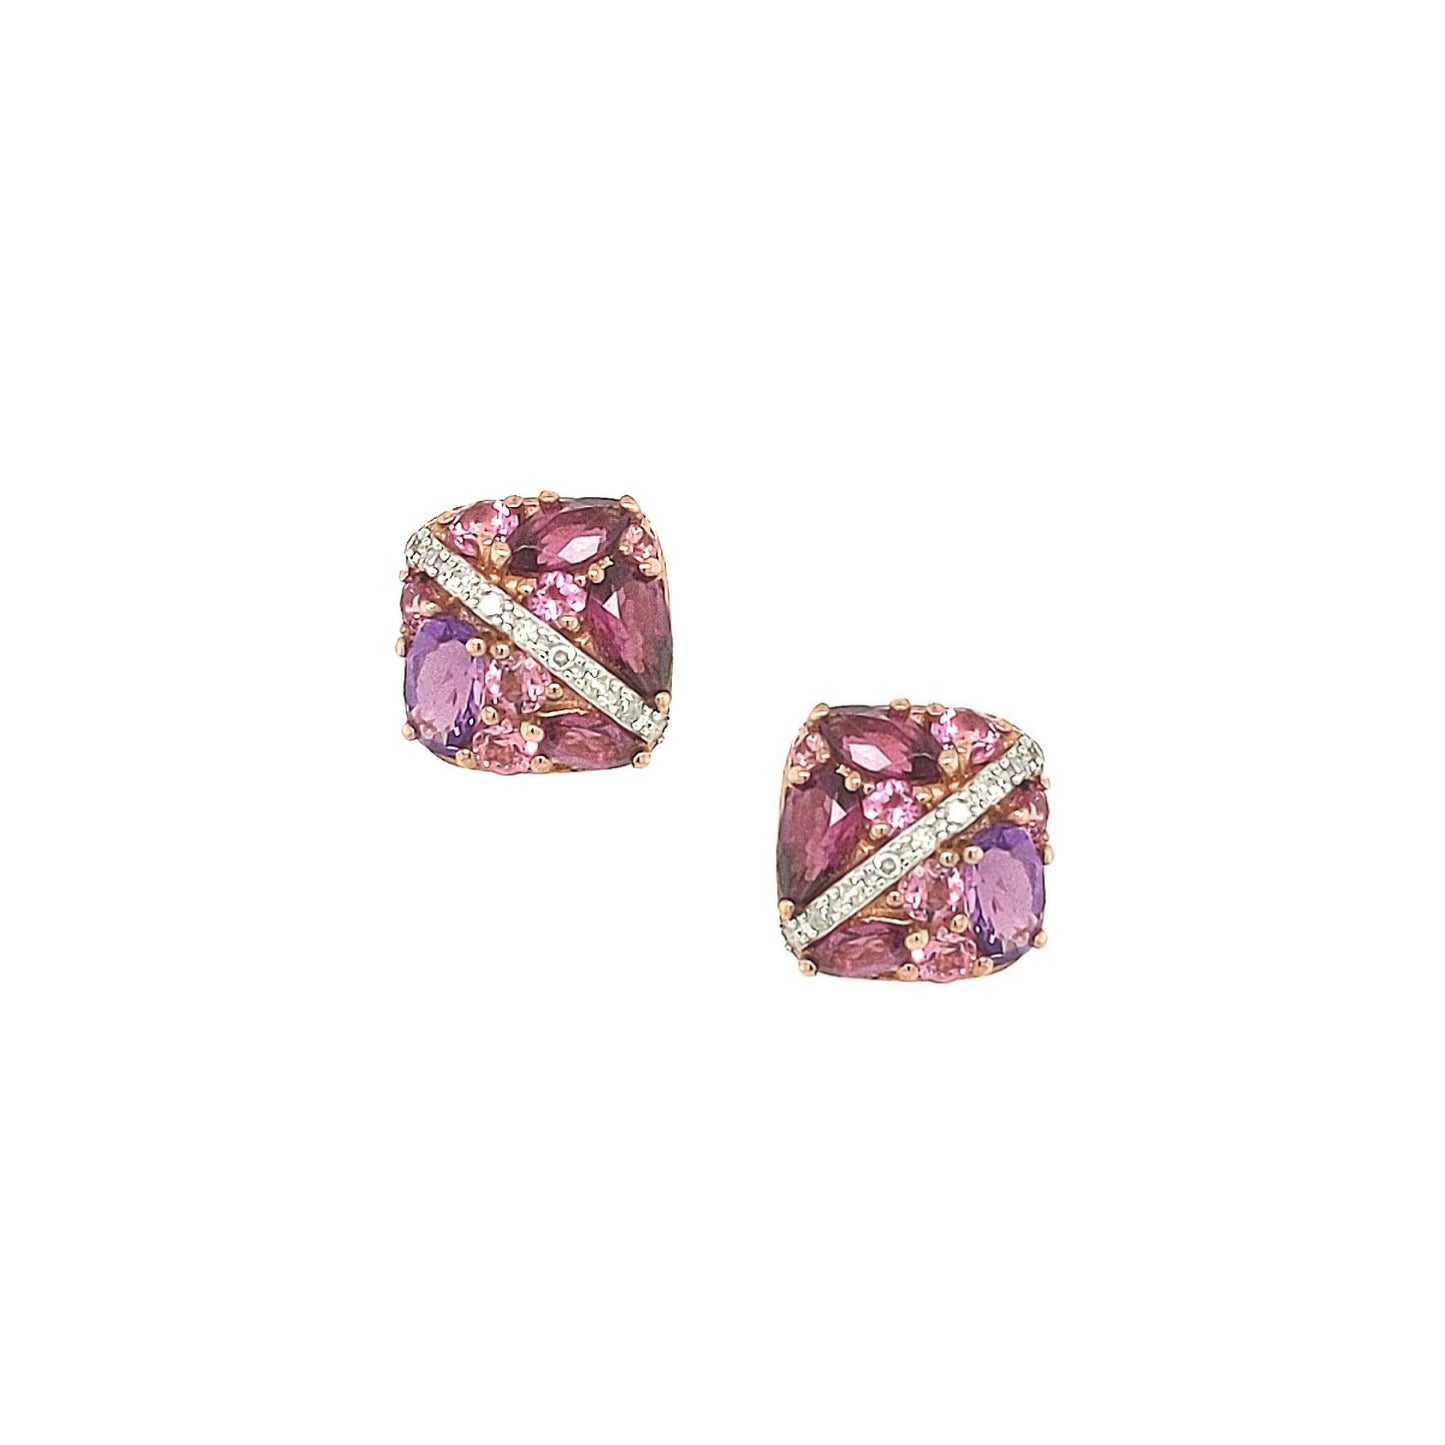 10k Rose Gold Square Shaped with Garnet, Pink Tourmaline, and Diamond Stud Earring - HK Jewels